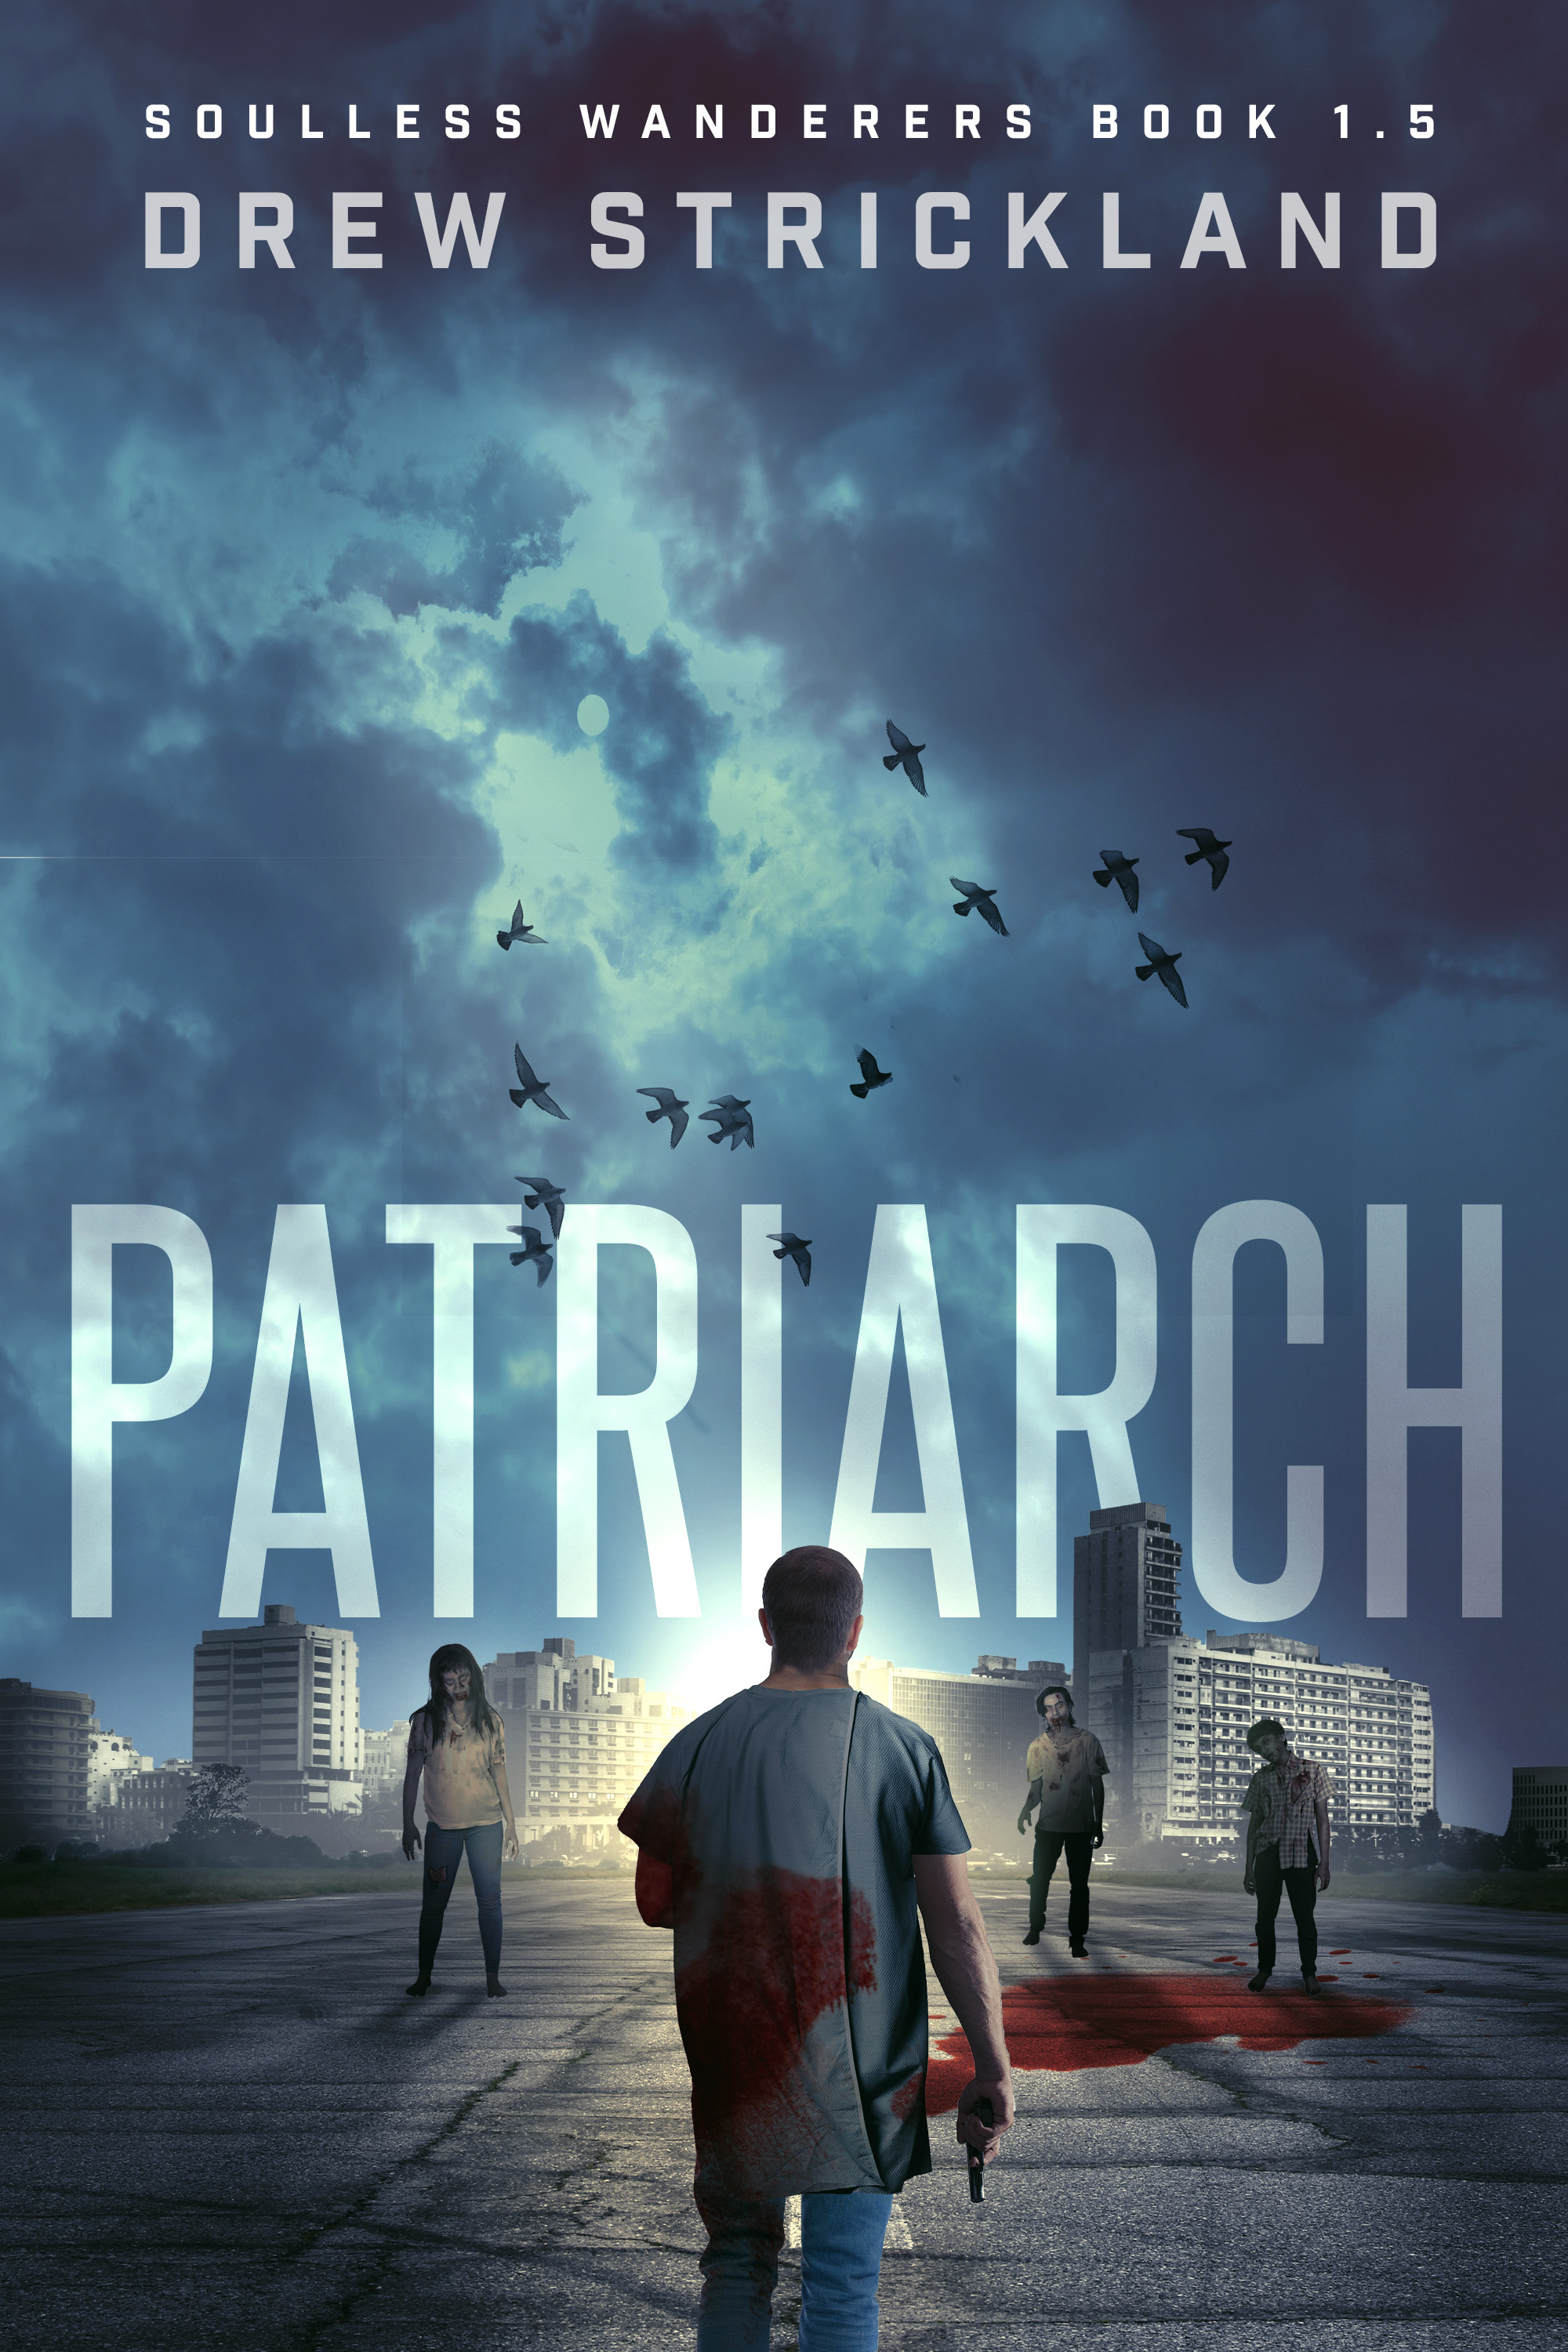 Patriarch: Soulless Wanderers Book 1.5